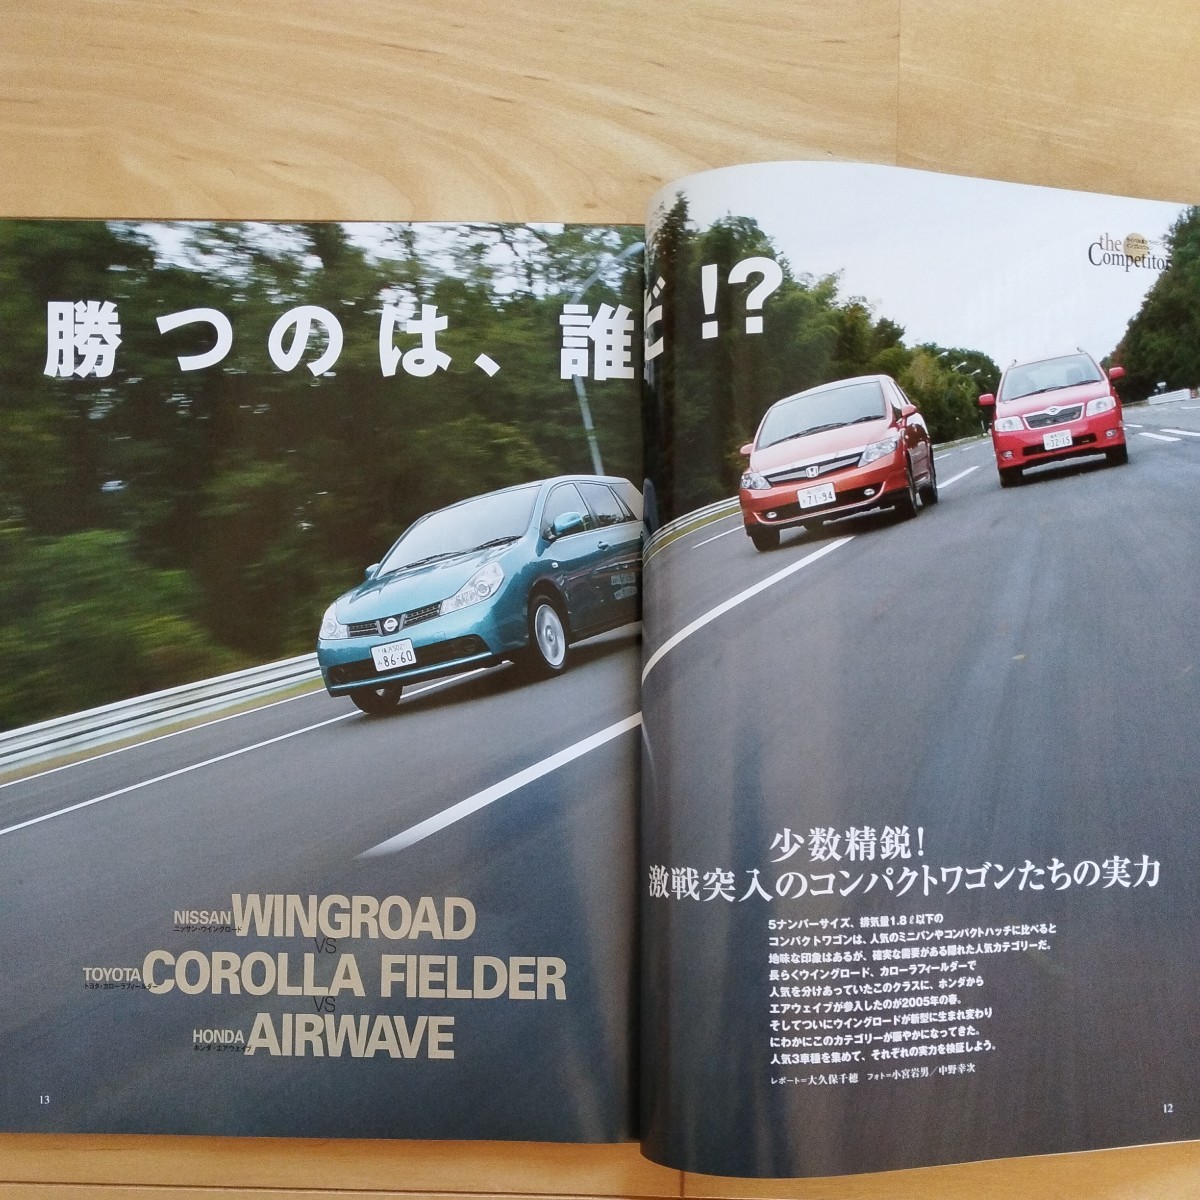  new model news flash no. 367.!! new model Wingroad. all three . bookstore Motor Fan separate volume ( Heisei era 18 year 1 month 5 day issue )